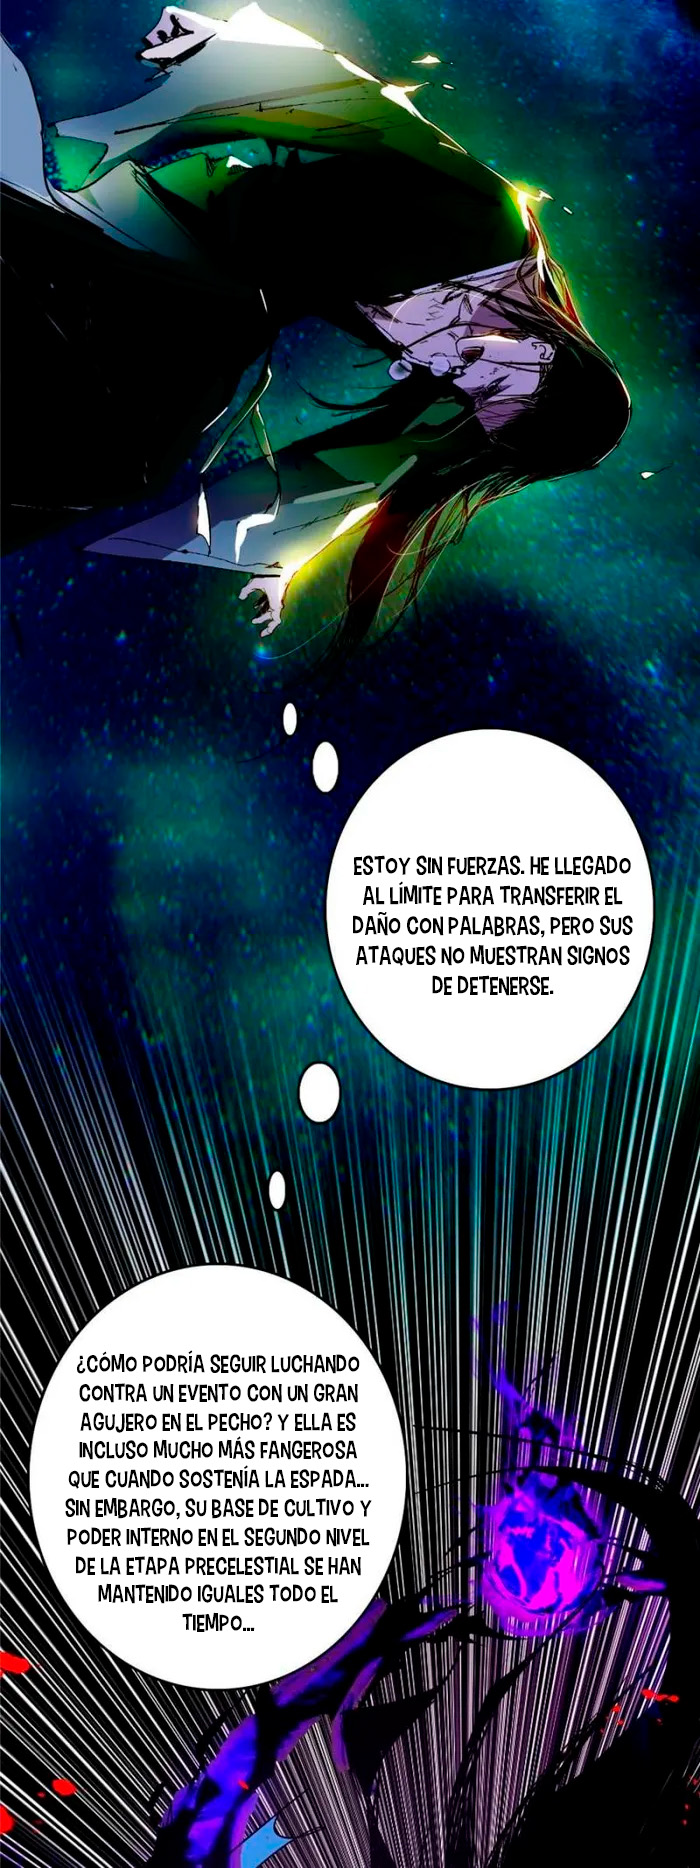 Manga Soy un dios maligno Chapter 386 image number 86